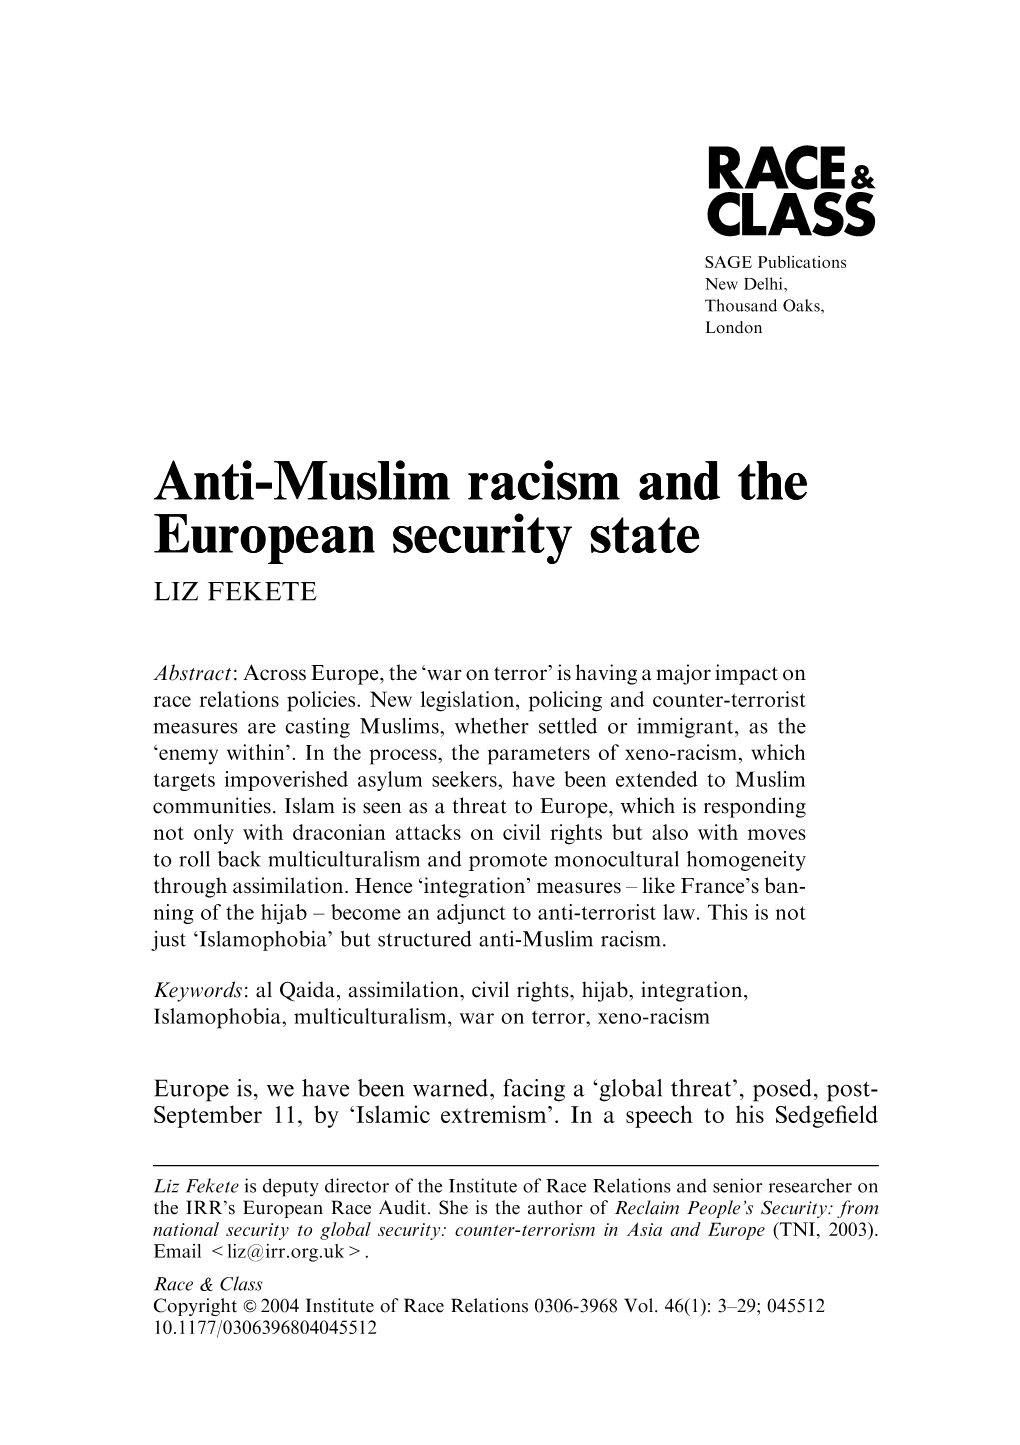 Anti-Muslim Racism and the European Security State LIZ FEKETE